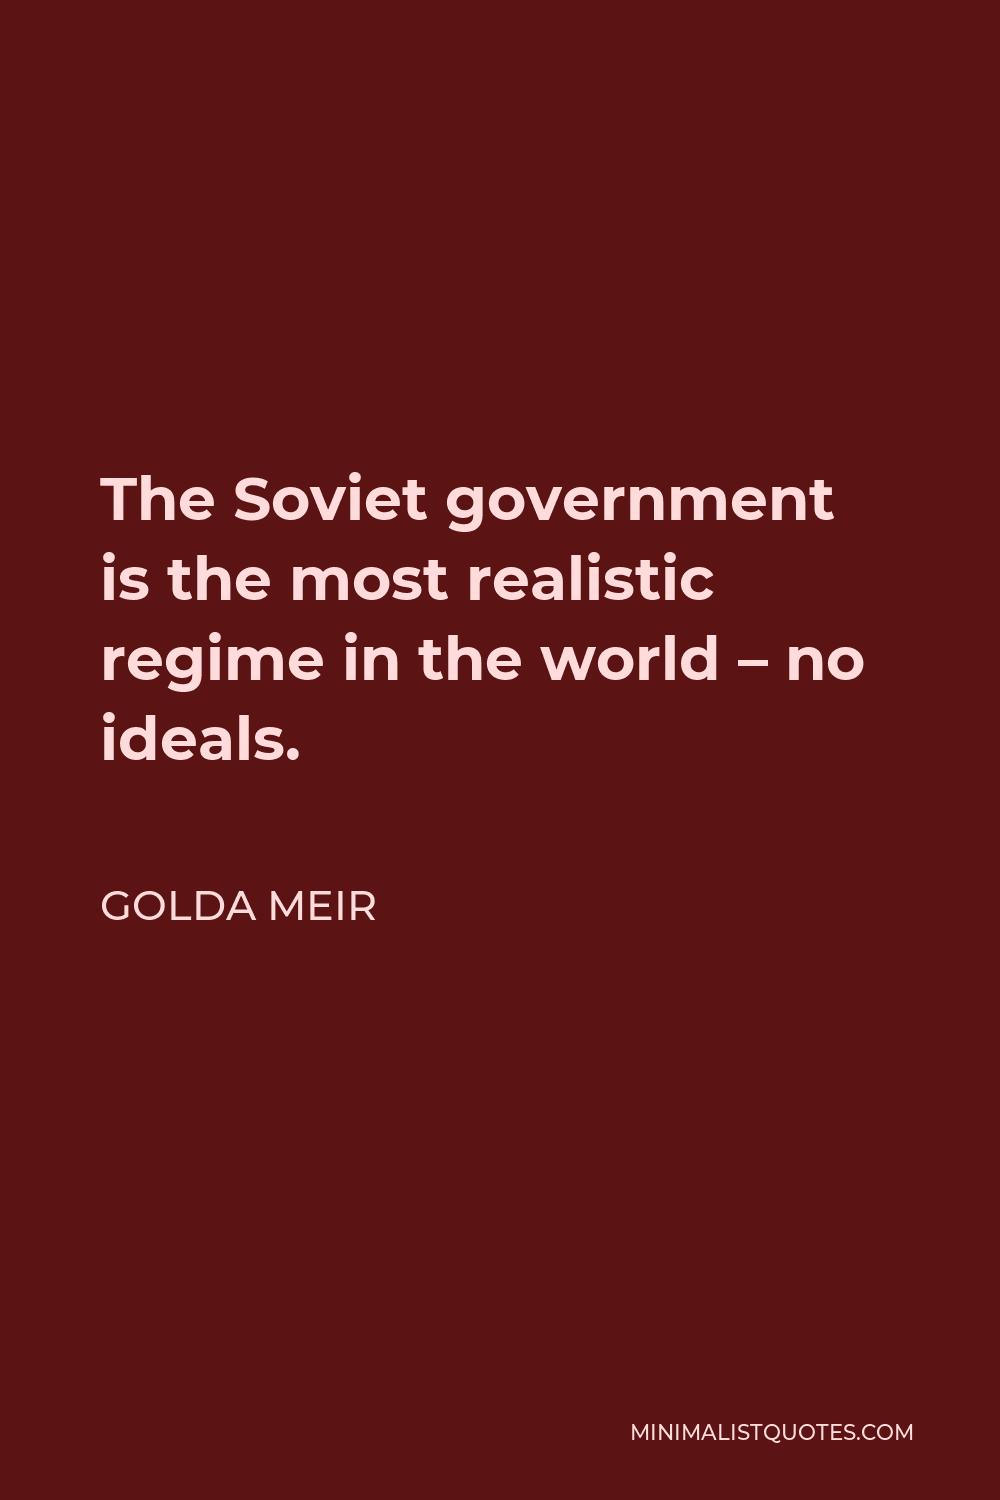 Golda Meir Quote - The Soviet government is the most realistic regime in the world – no ideals.